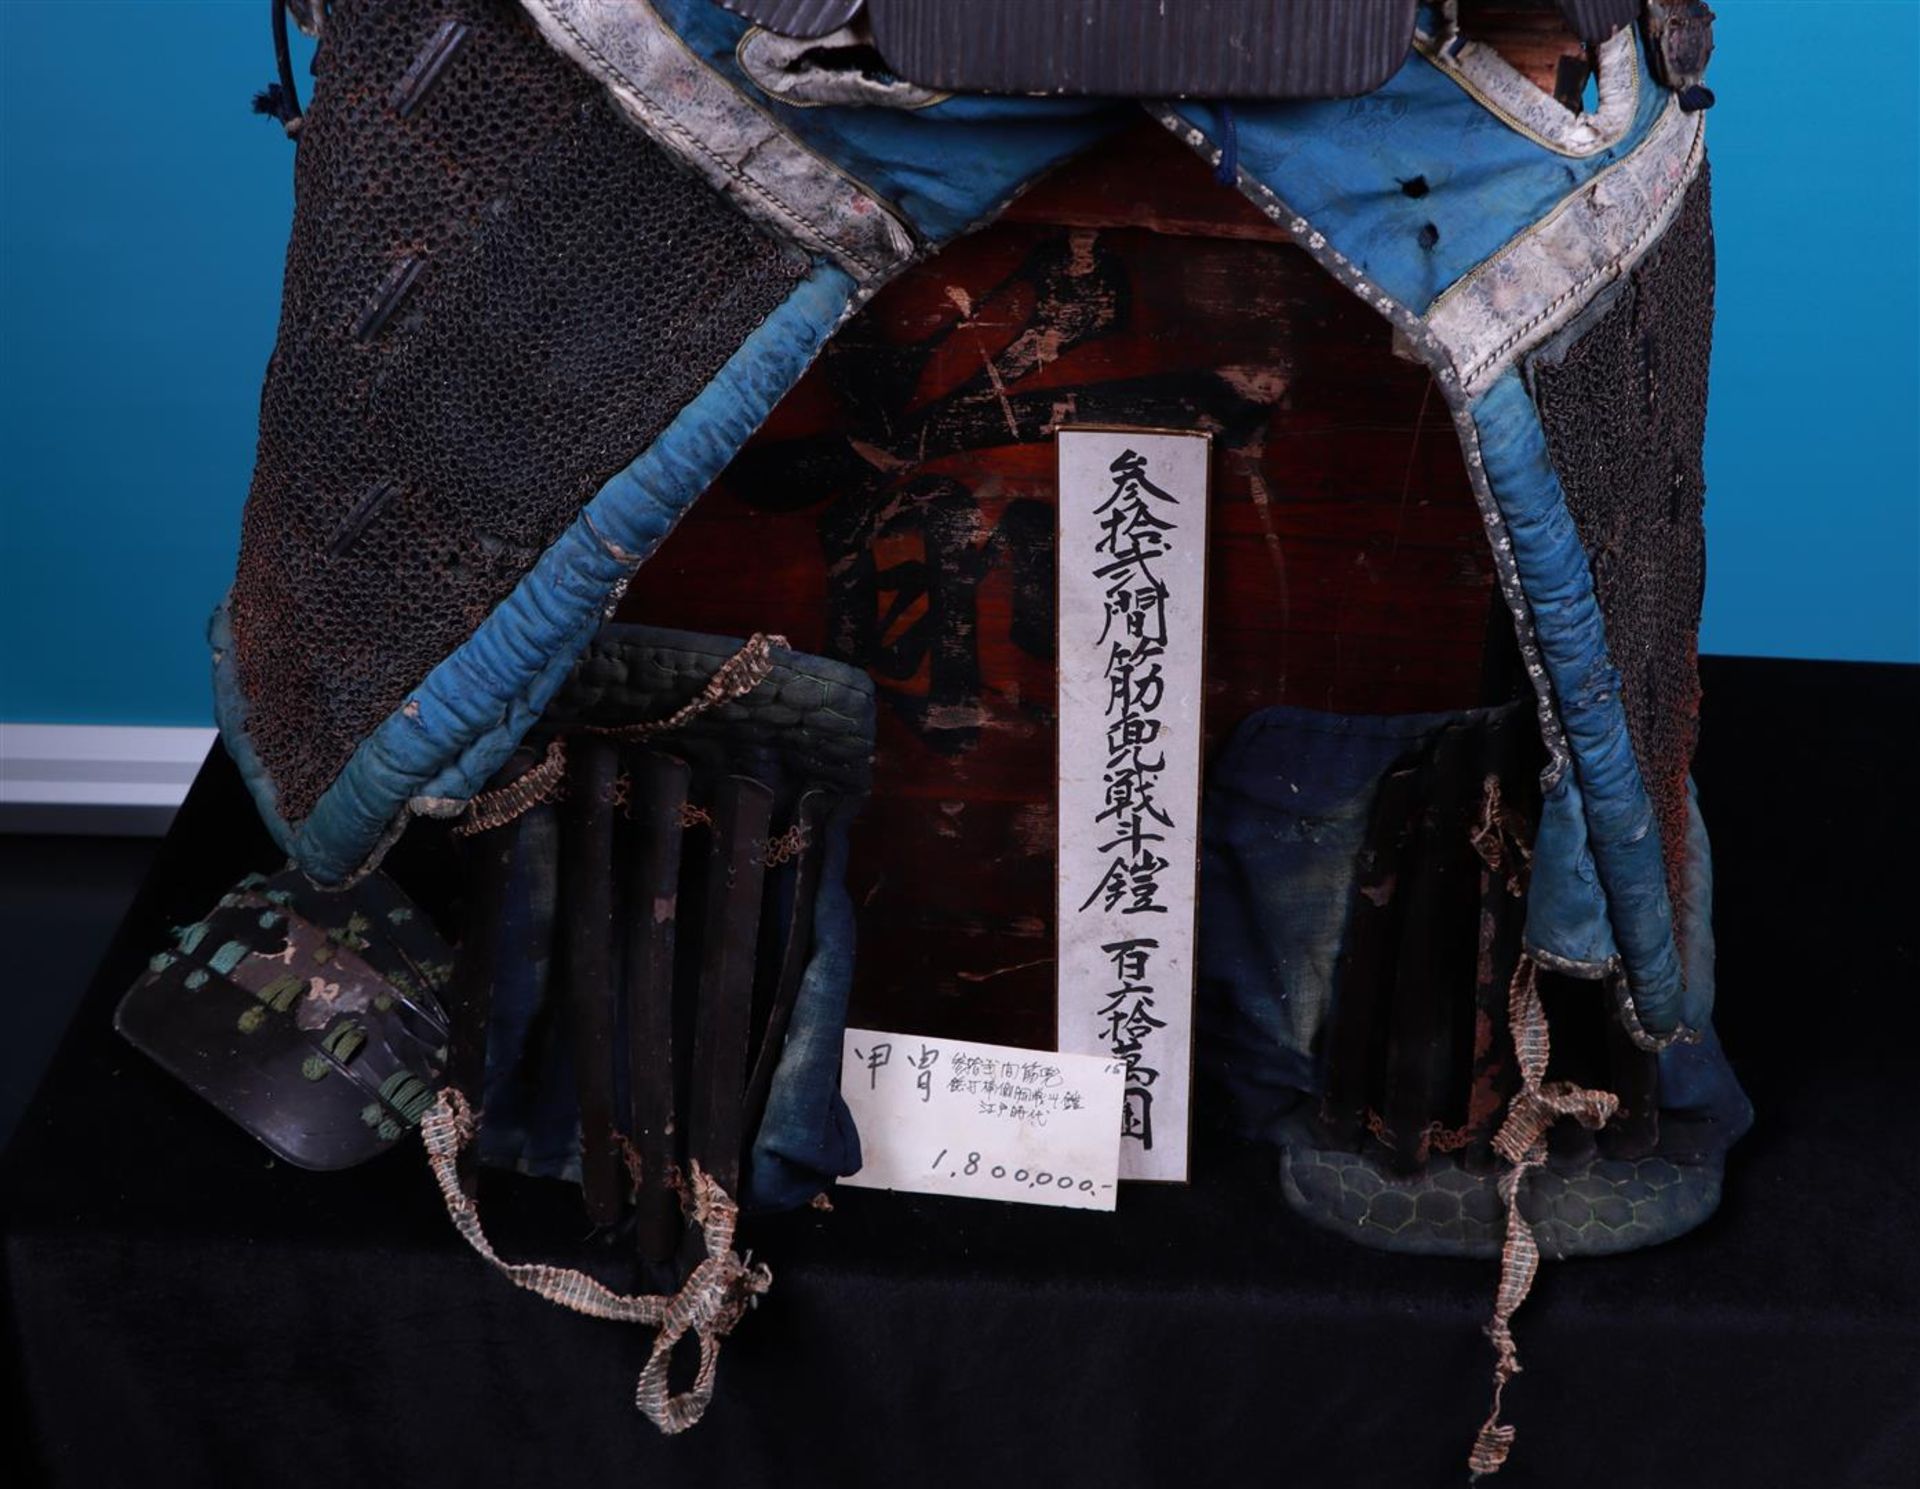 An antique Edo period, black lacquered Japanese armor (yoroi) laced with navy blue and green cords a - Image 4 of 8